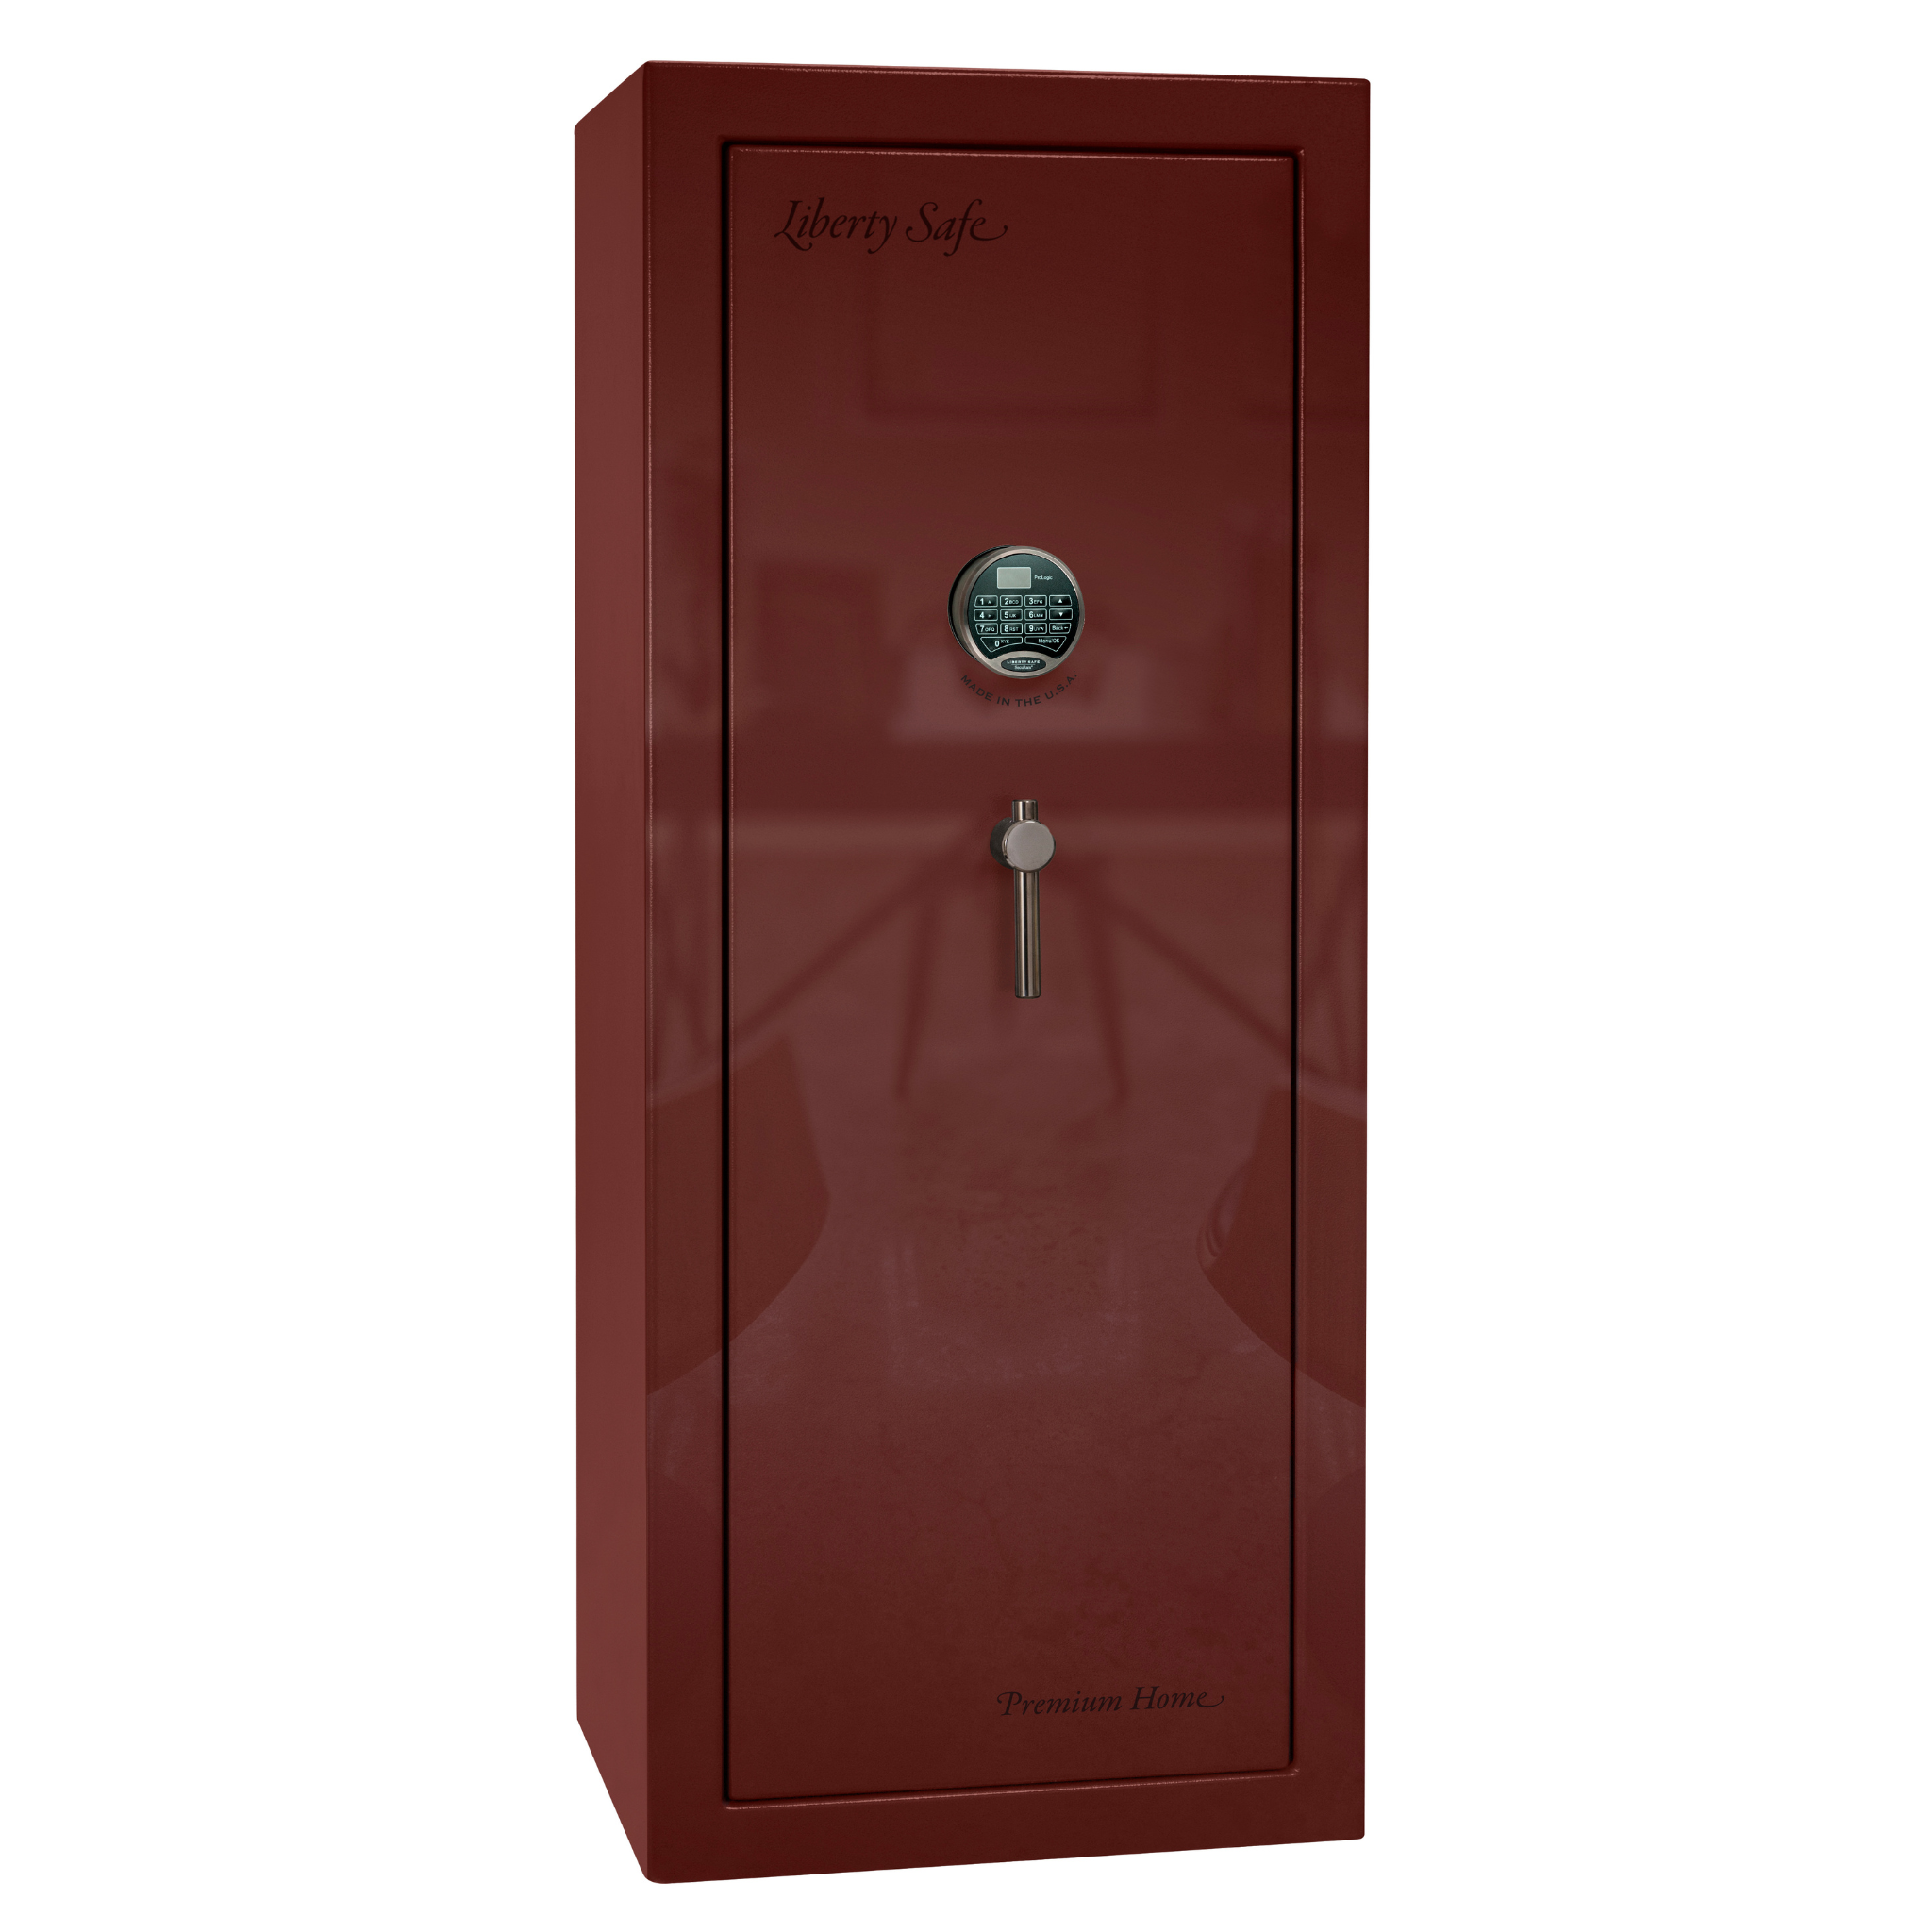 Premium Home Series | Level 7 Security | 2 Hour Fire Protection | 17 | Dimensions: 60.25"(H) x 24.5"(W) x 19"(D) | Burgundy Gloss Black Chrome - Closed Door